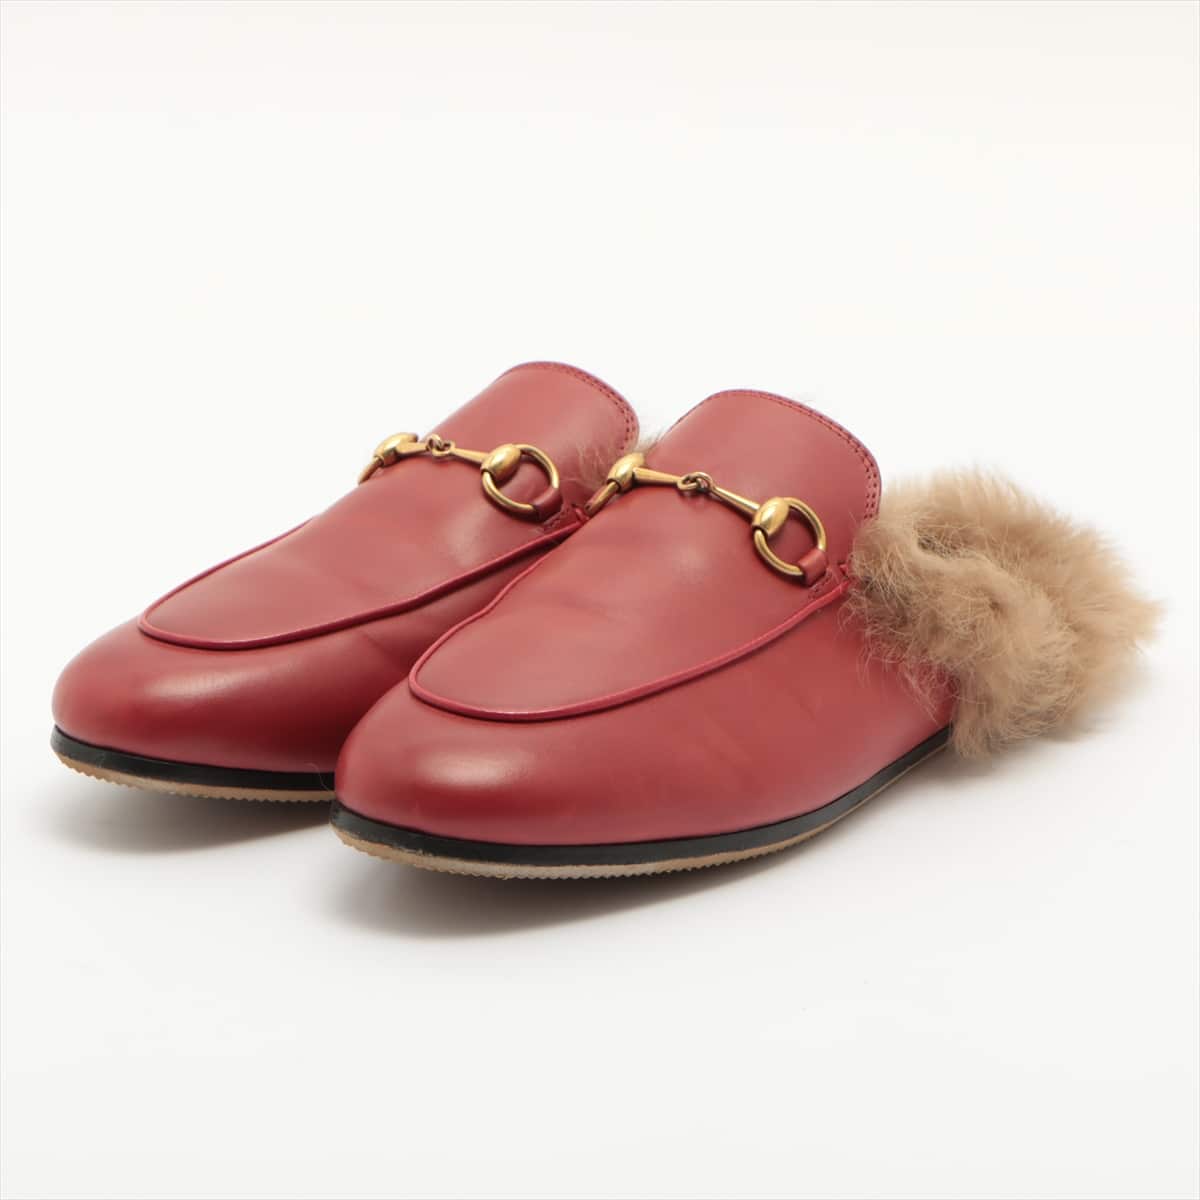 Gucci Princetown Fur × Leather Sandals Ladies' Red Horsebit Unknown size